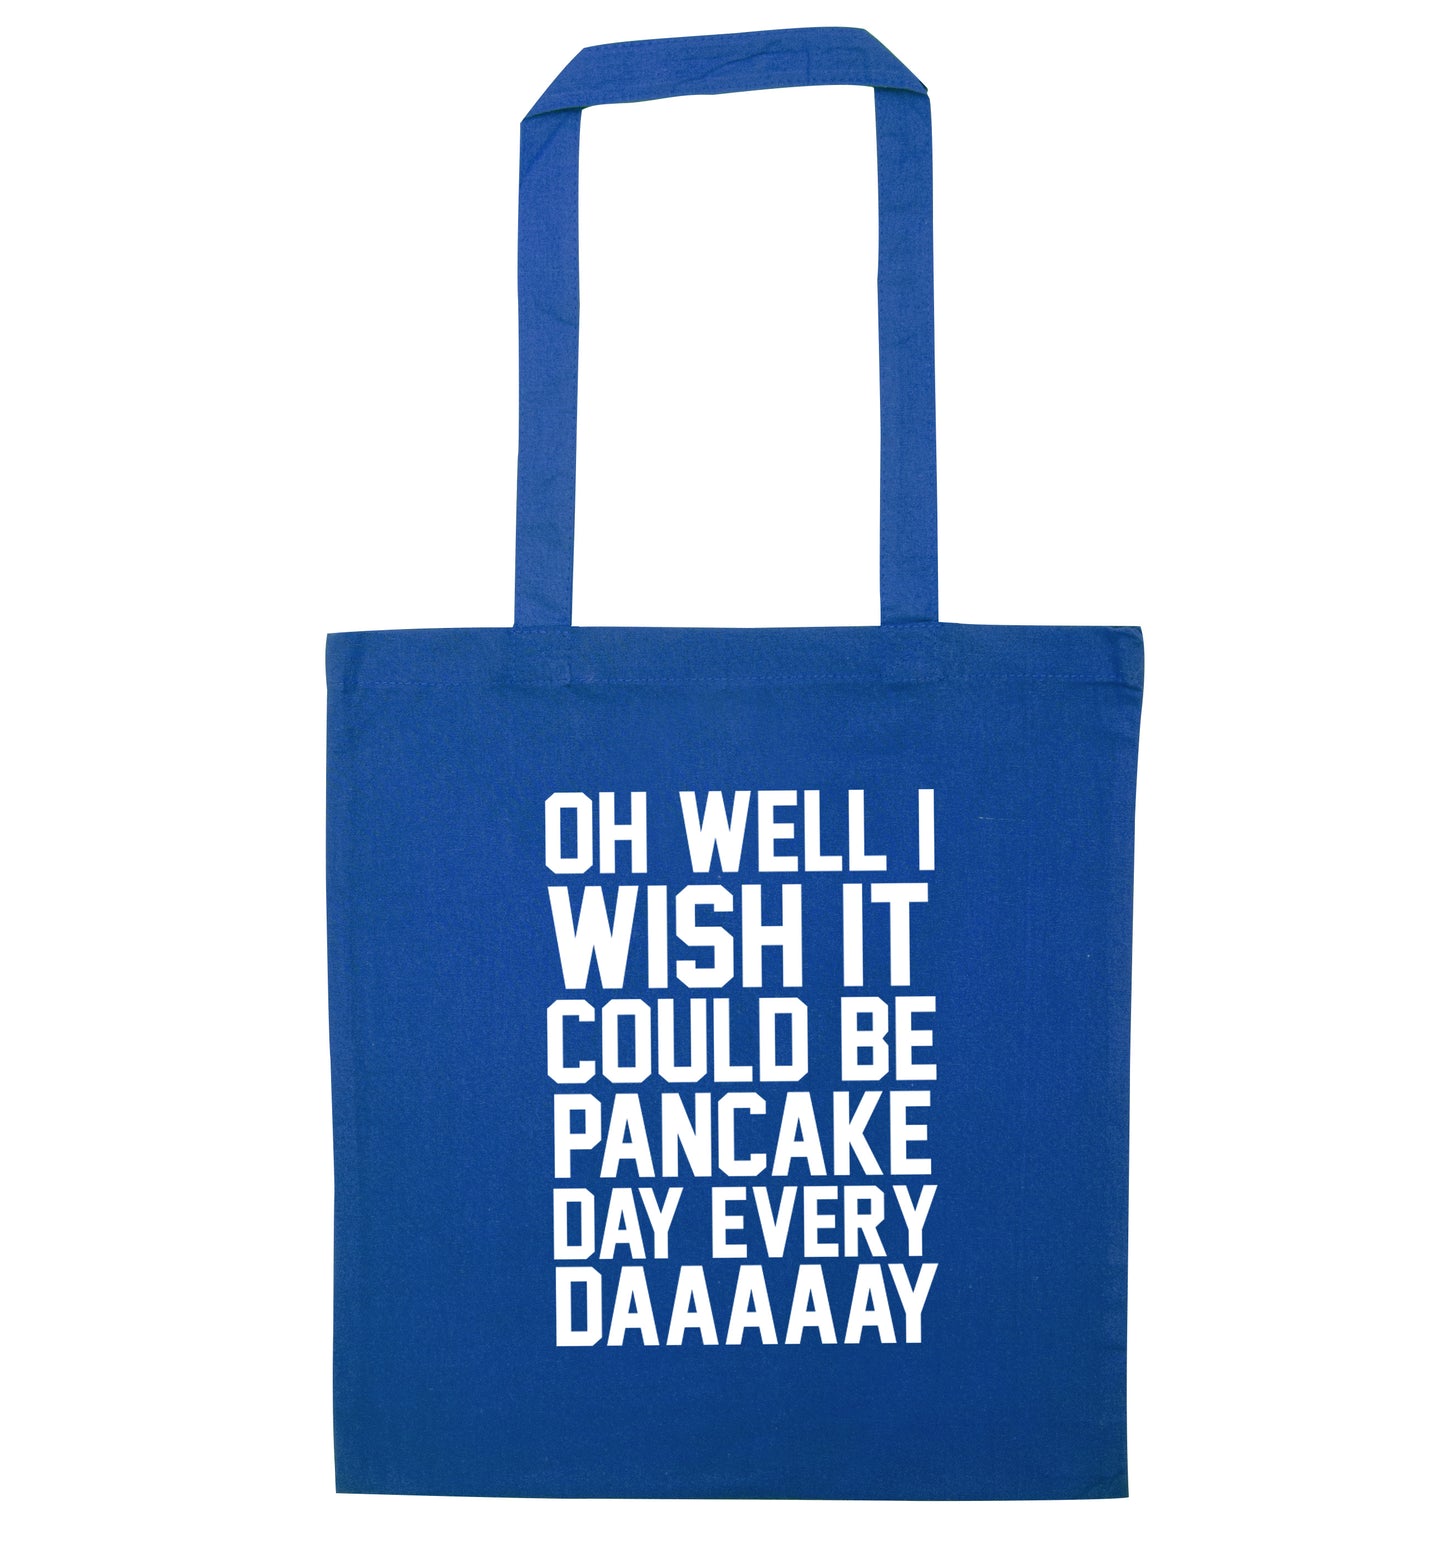 Oh well I wish it could be pancake day everyday blue tote bag